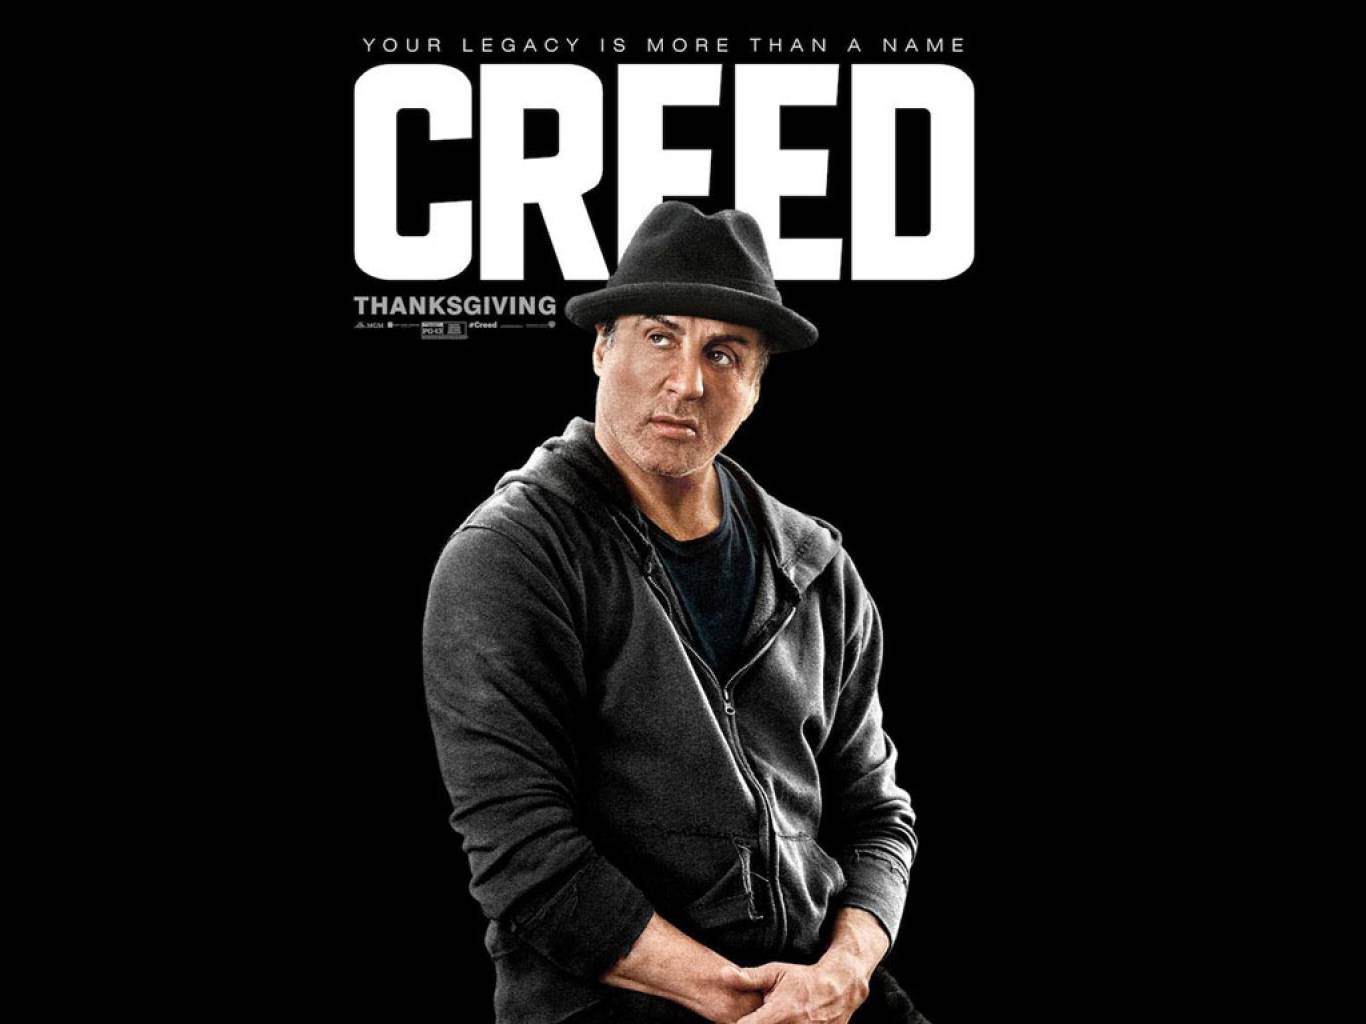 Best 15 Sylvester Stallone Movies That Are A Must Watch!